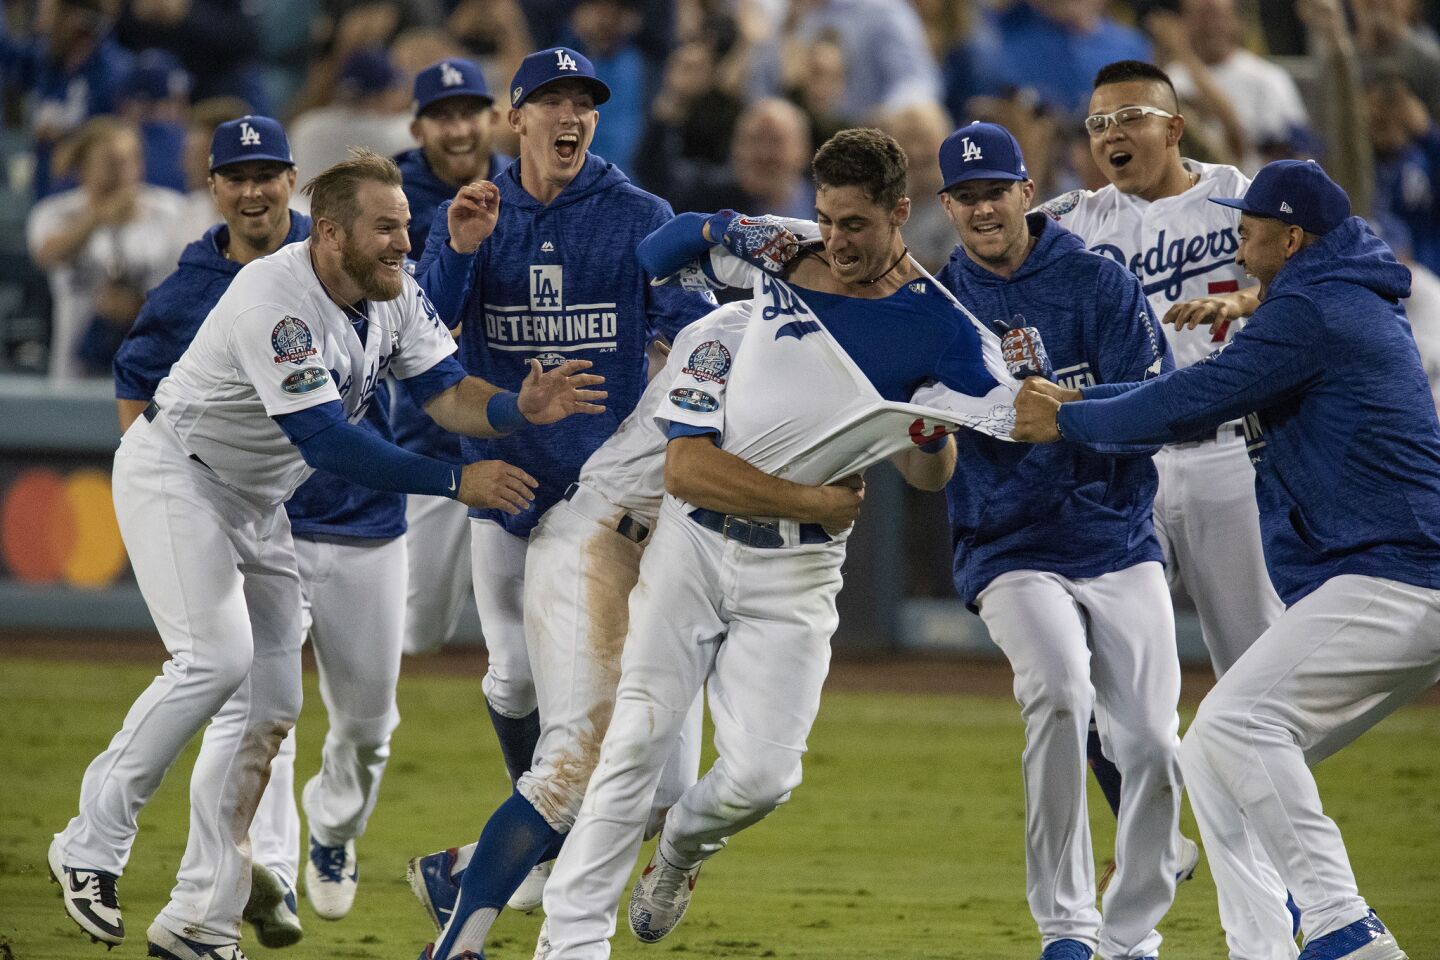 Teammates mob Los Angeles Dodgers center fielder Cody Bellinger after he hit the game winning RBI in the 13th inning.